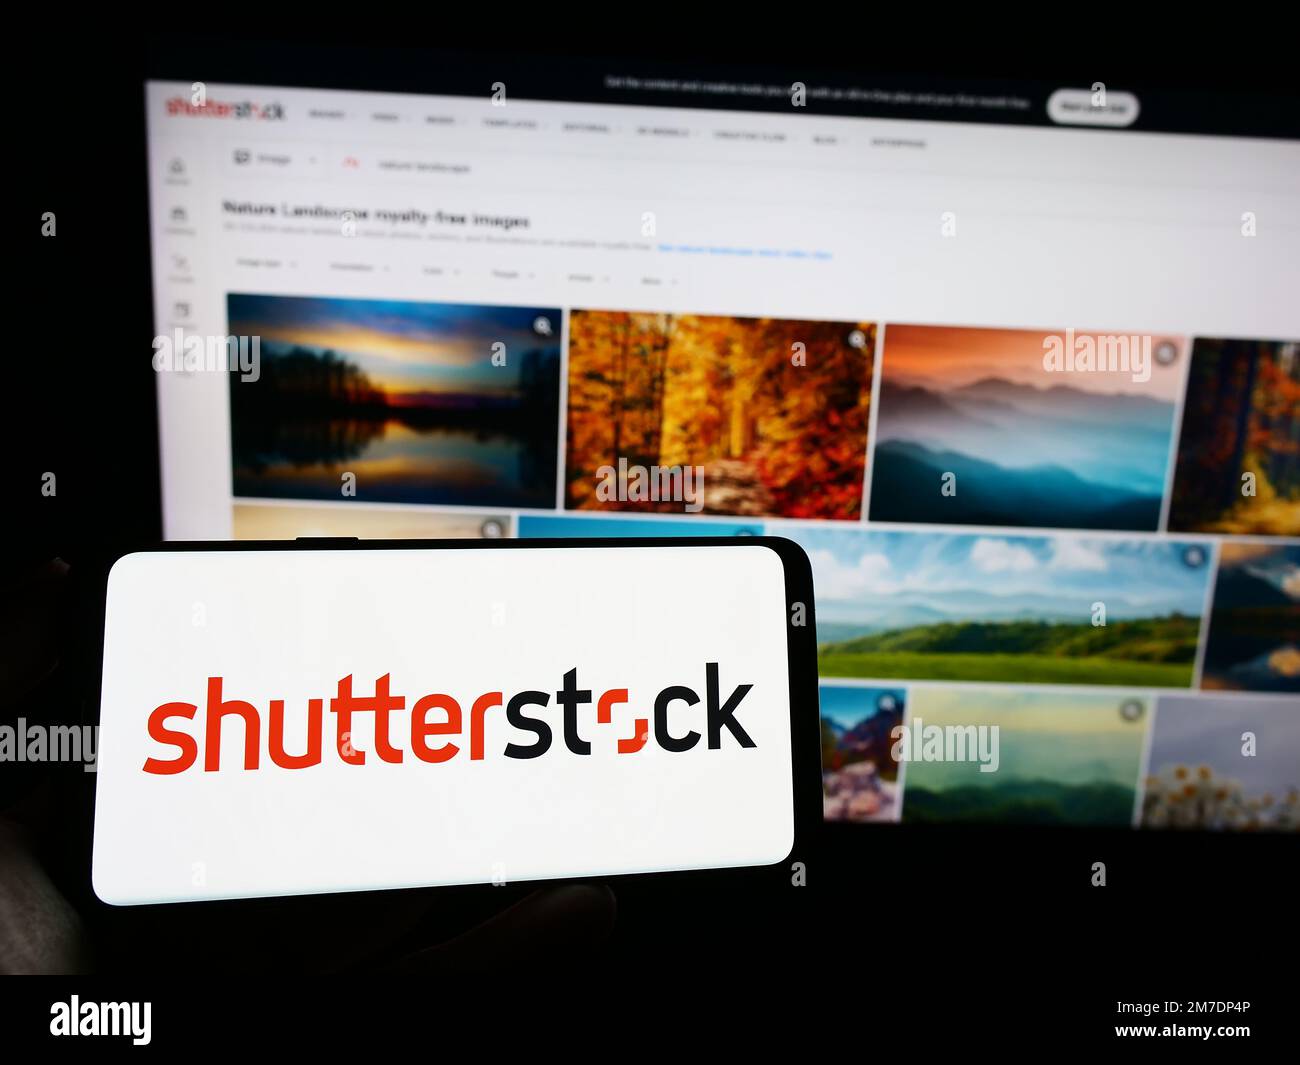 Person holding cellphone with logo of American stock photography company Shutterstock Inc. on screen in front of webpage. Focus on phone display. Stock Photo